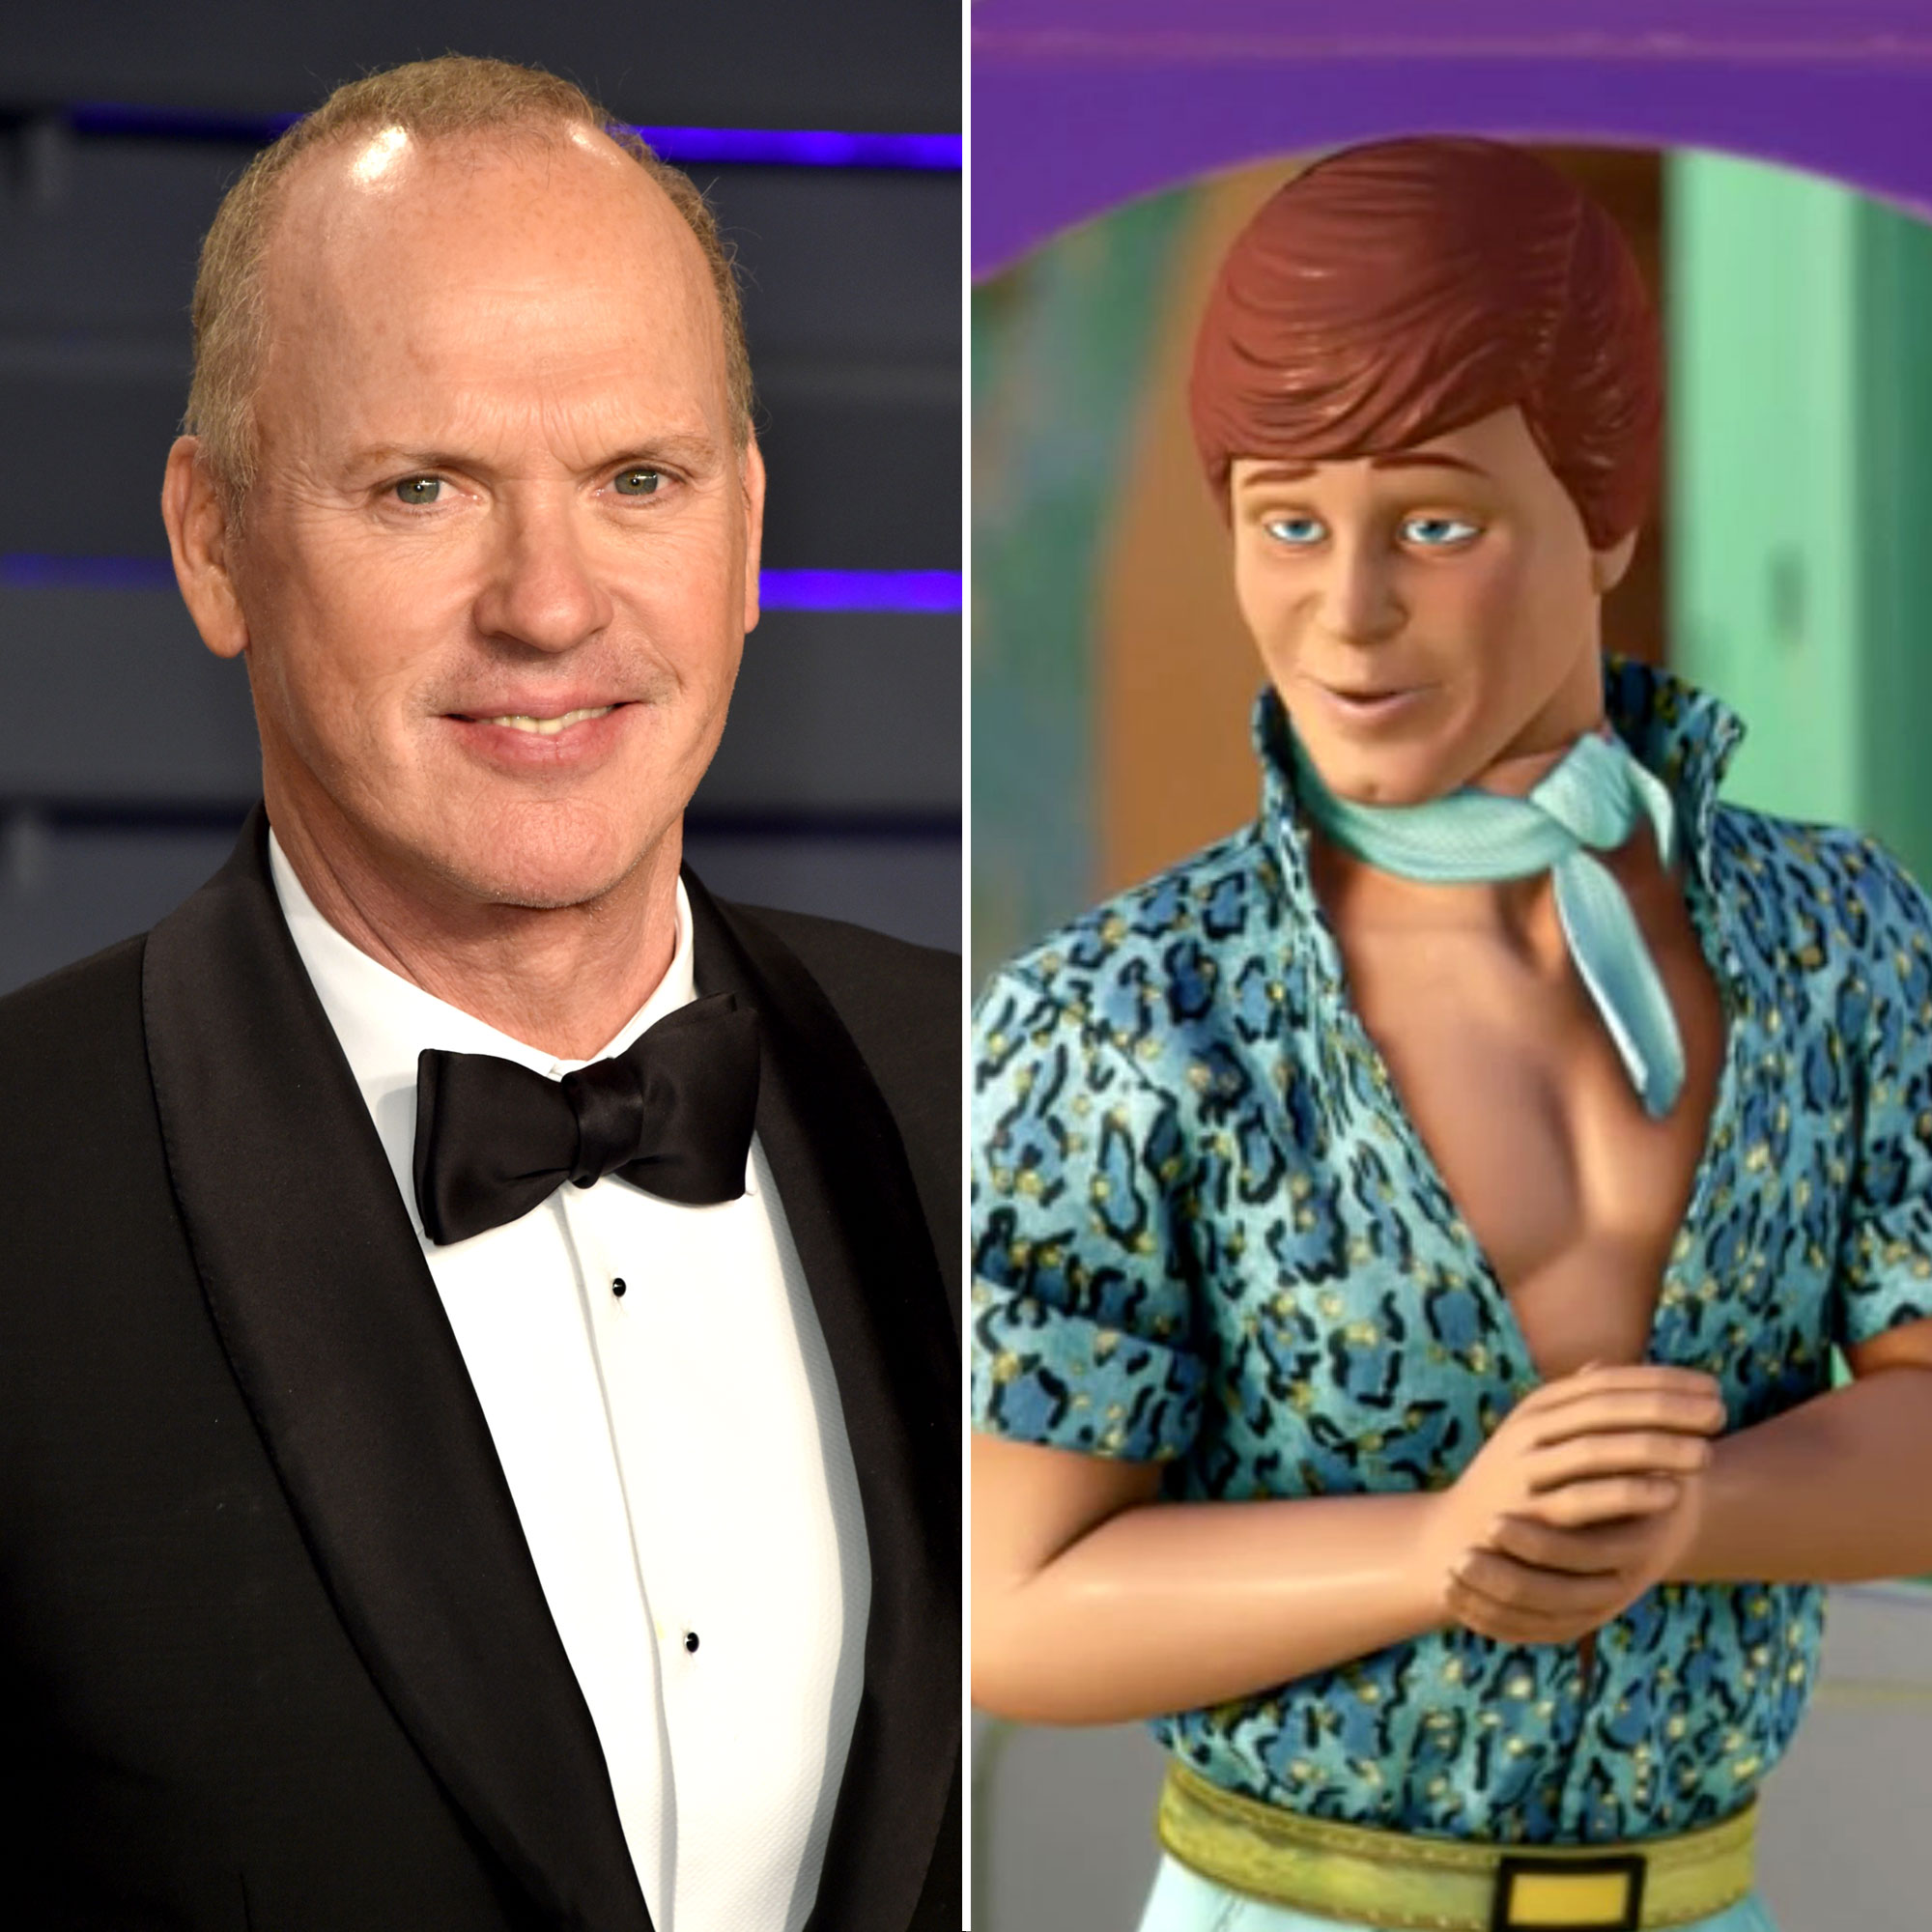 toy story 3 ken voice